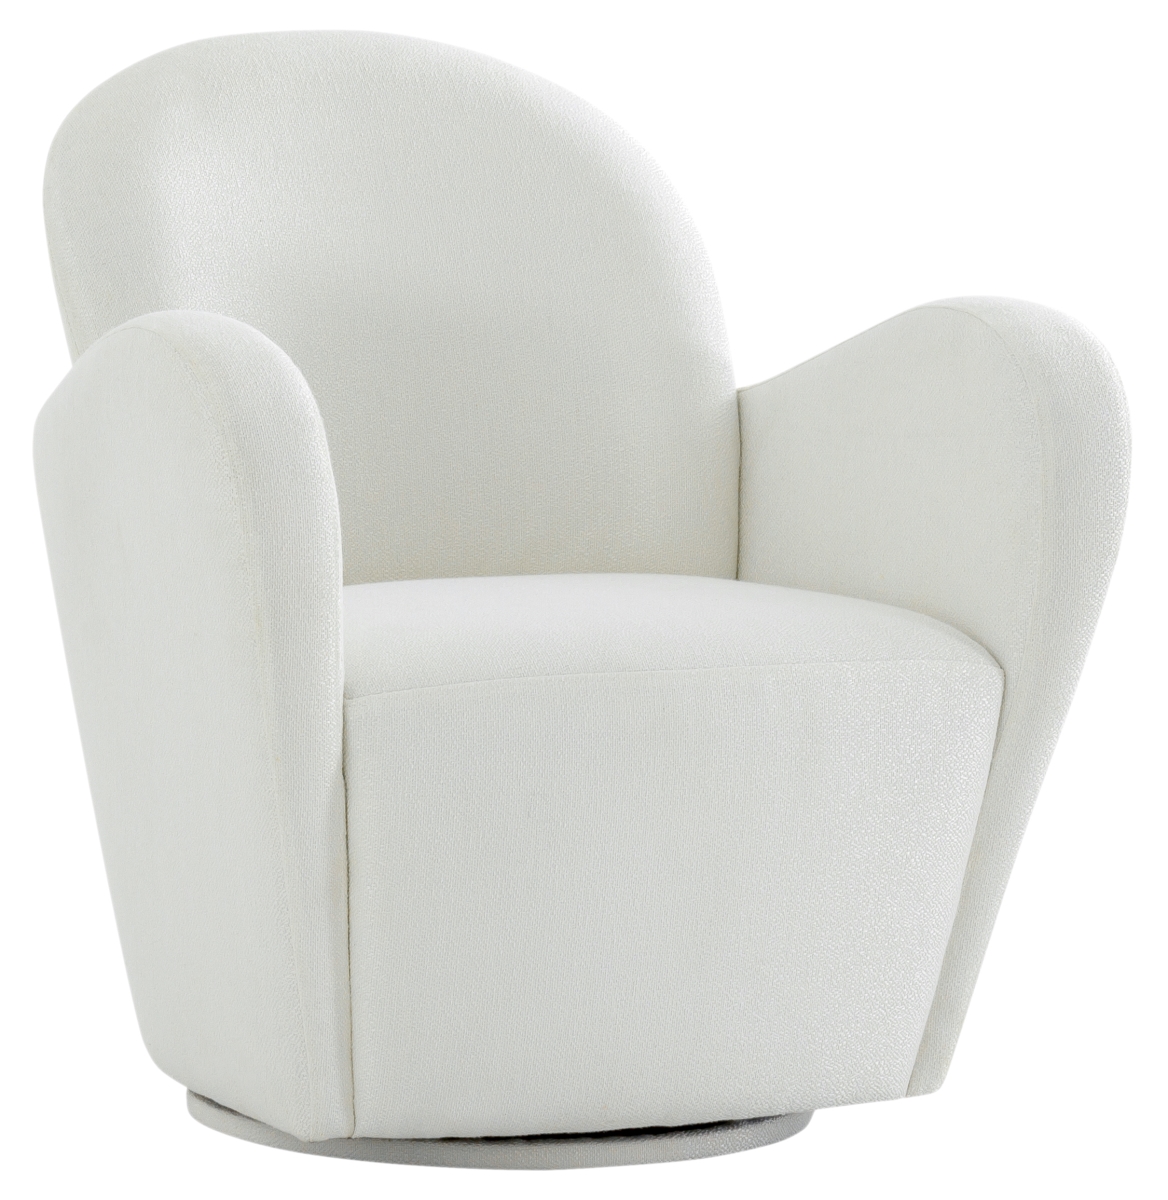 Pzw-988 Elena Collection Modern Swivel Chair, Ivory